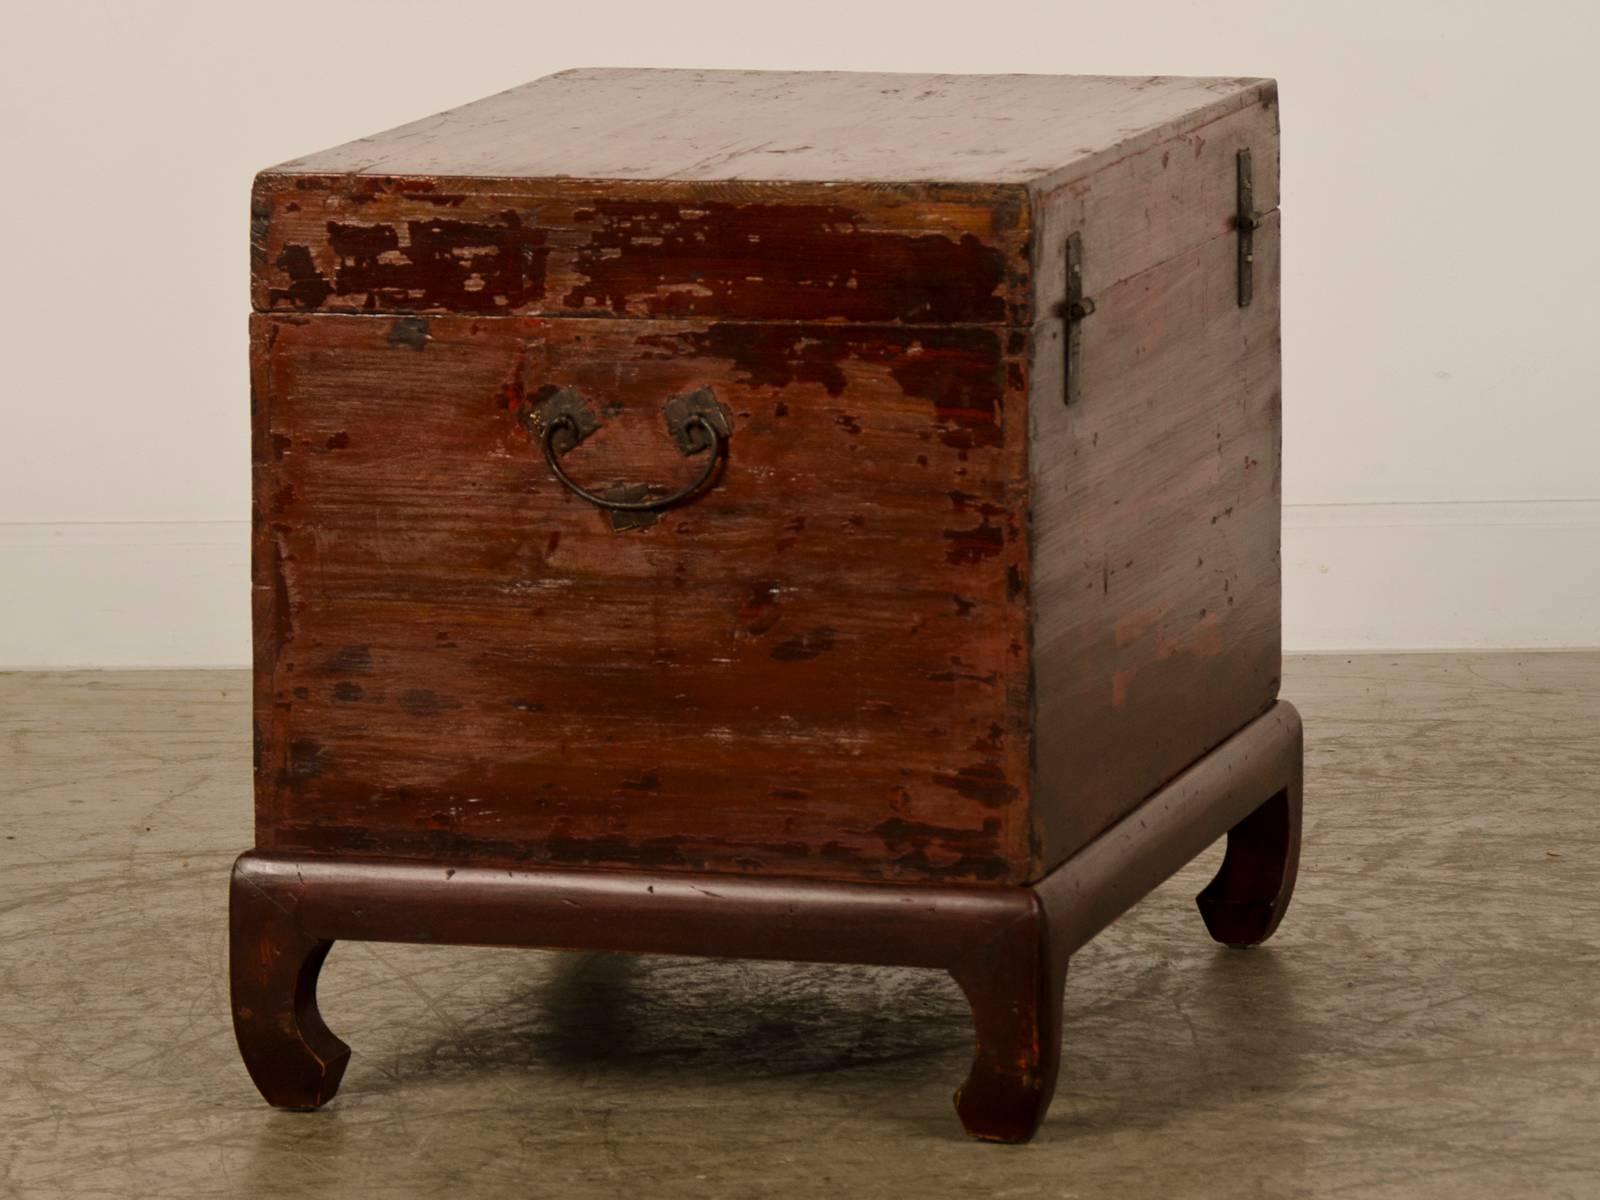 Red Lacquer Antique Chinese Trunk Kuang Hsu Period, circa 1875 For Sale 1